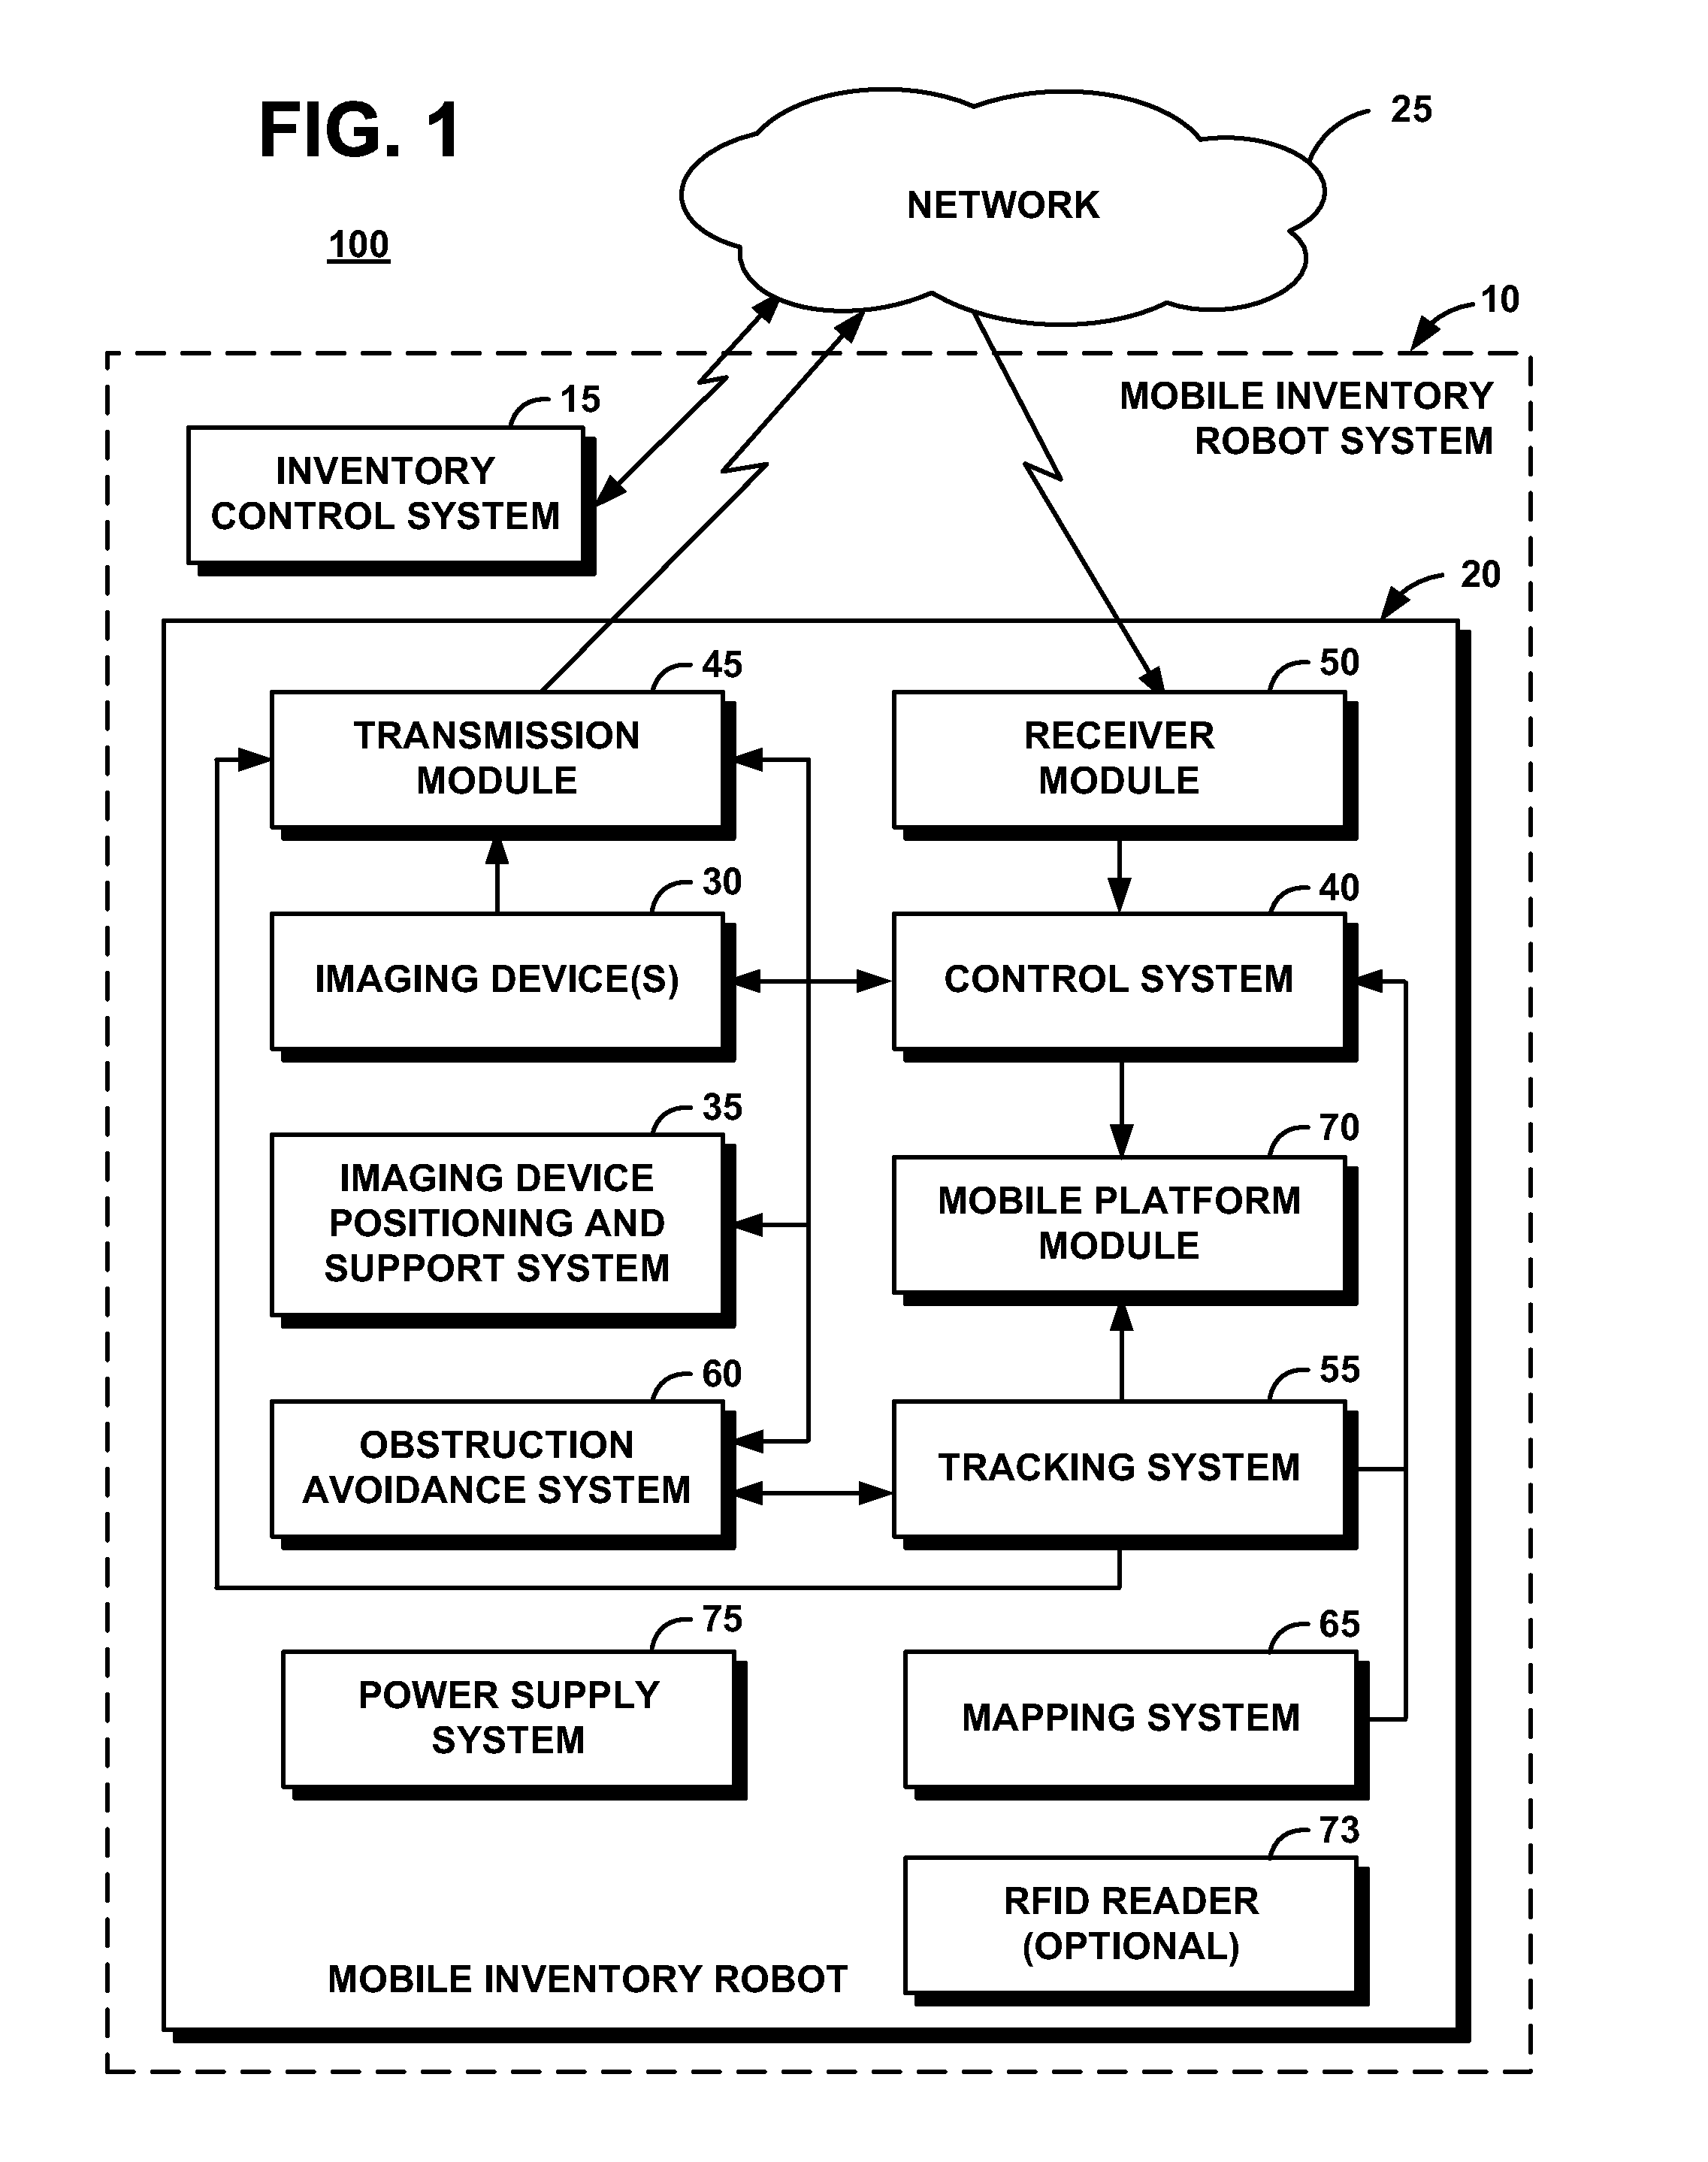 System and Method for Performing Inventory Using a Mobile Inventory Robot